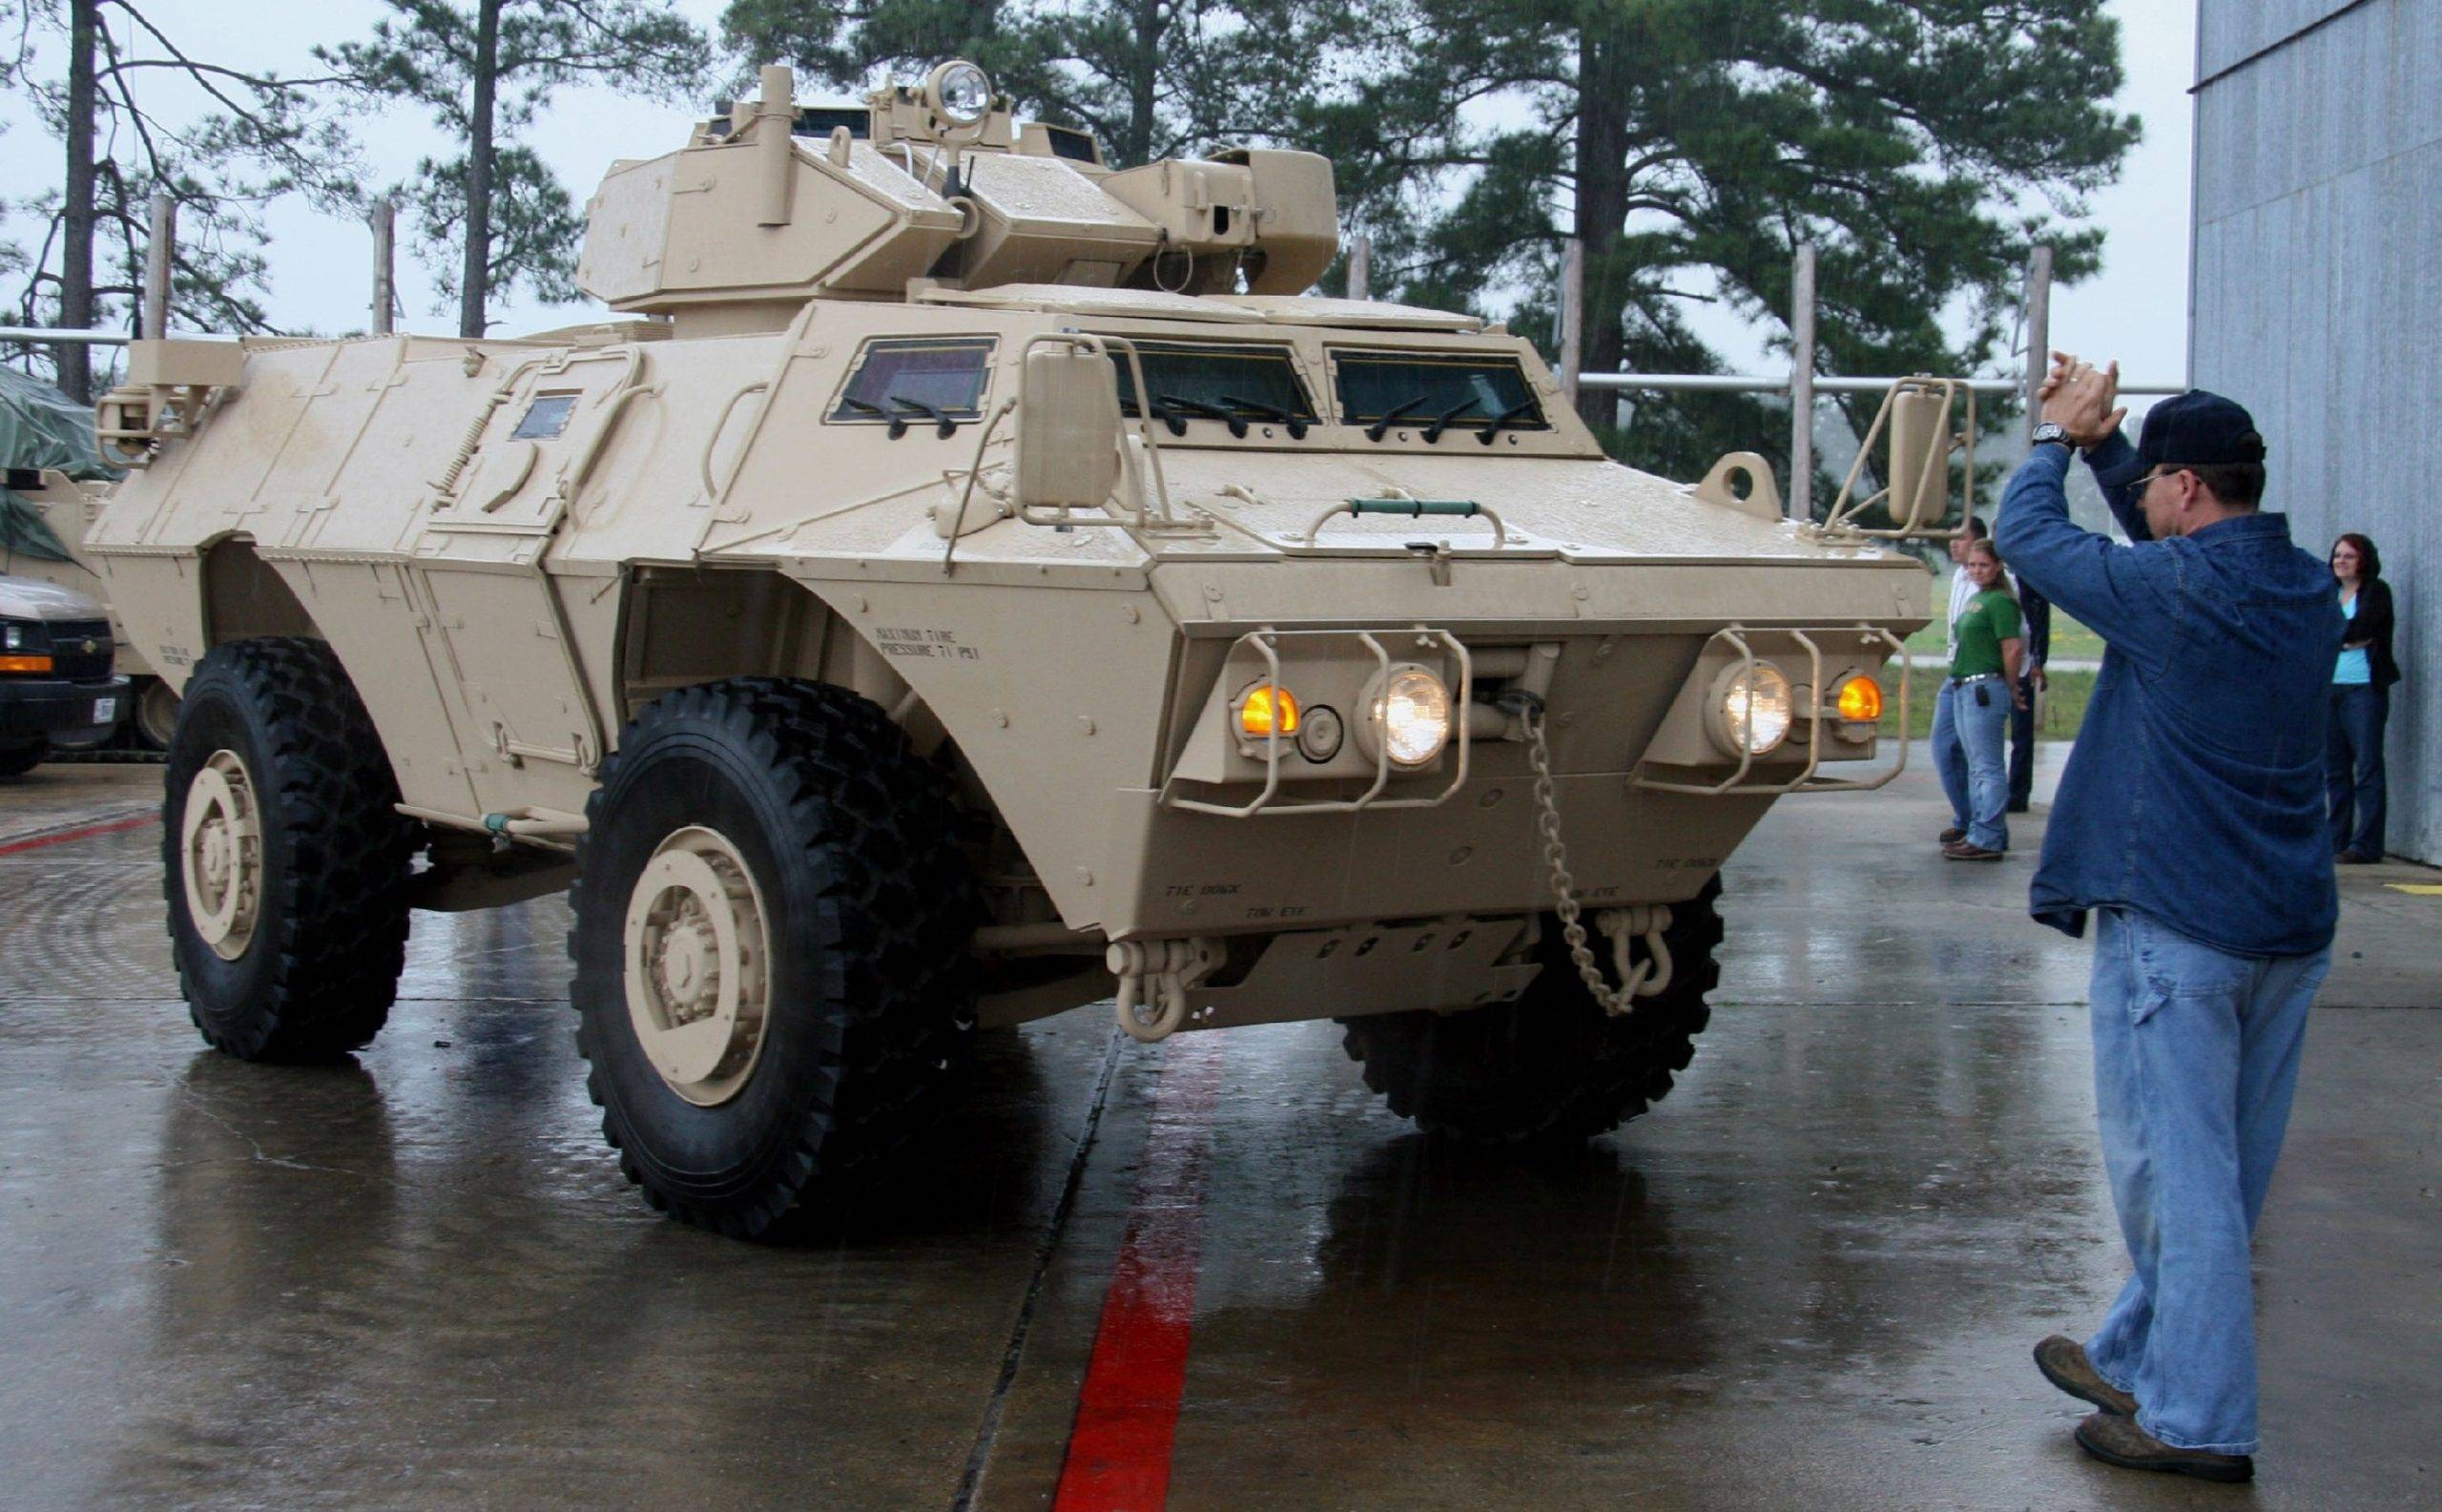 M1117 armored security vehicle